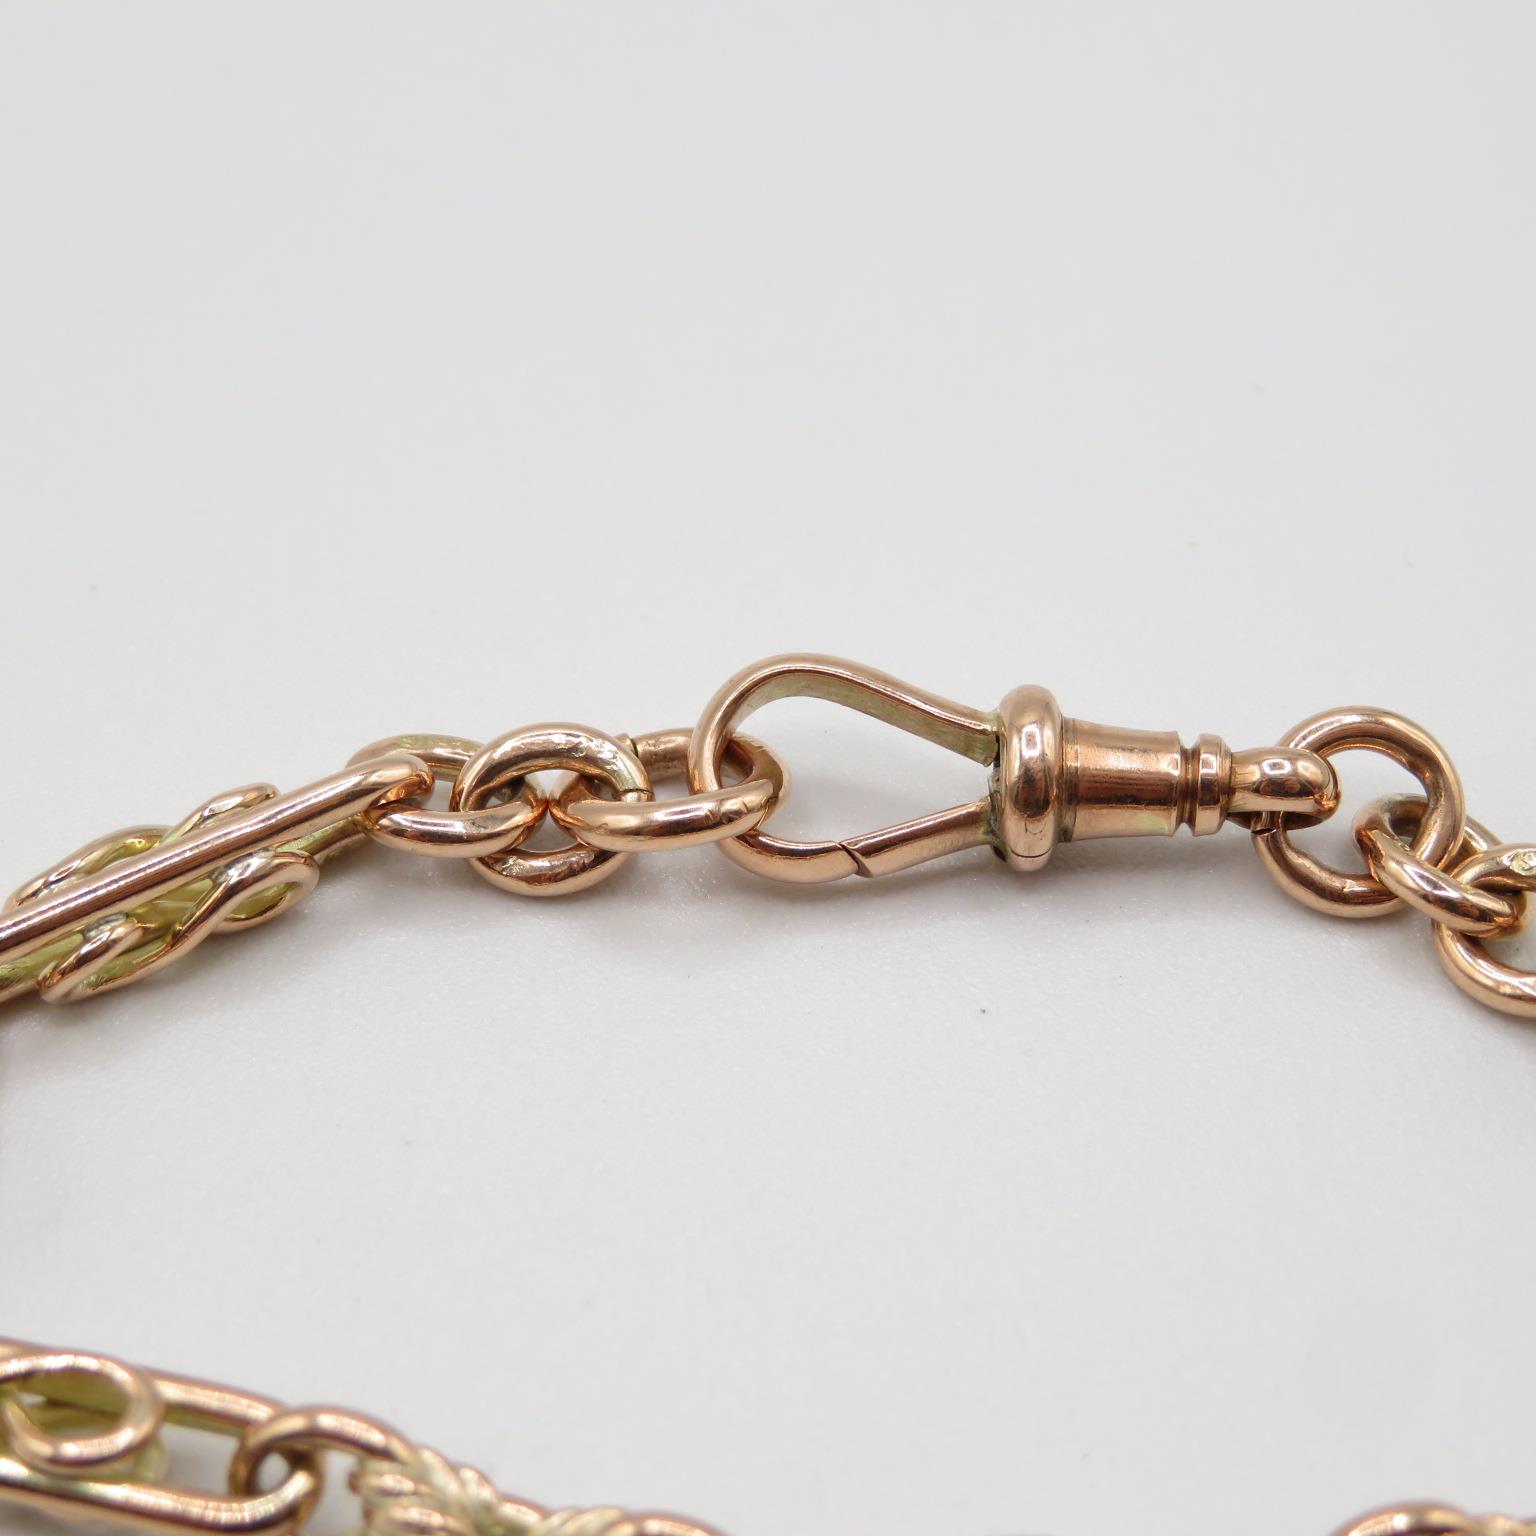 Old watch chain converted into bracelet with dog clip 7" long 15.7g - Image 6 of 7